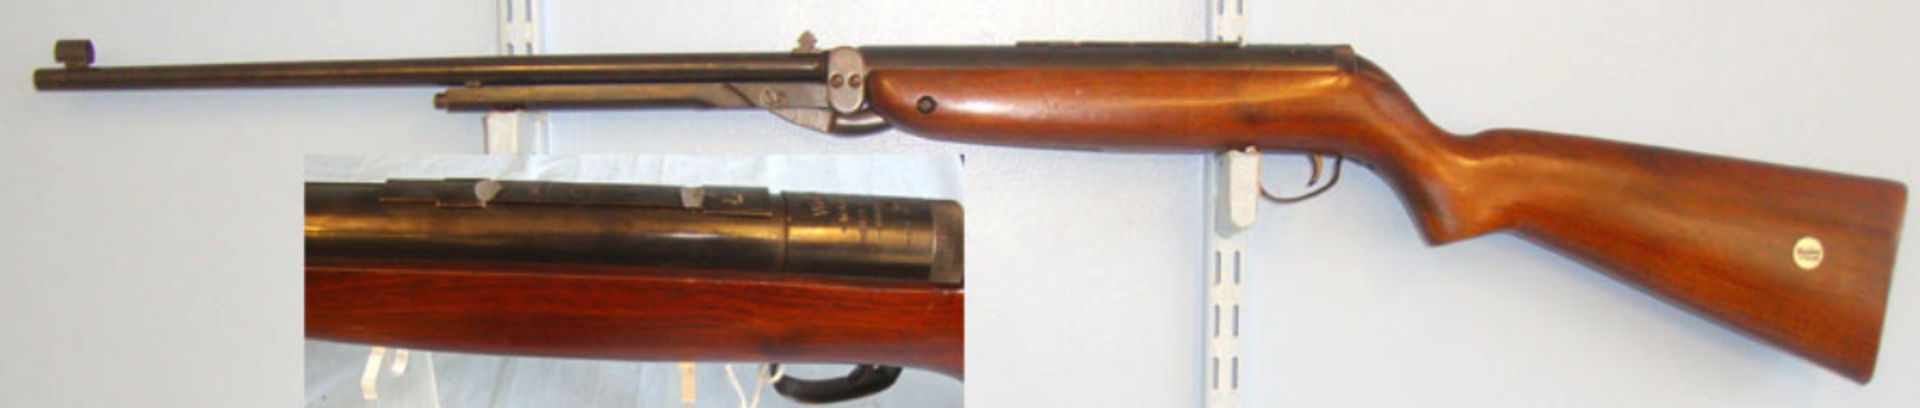 1961-1964 Webley Mark 3, 4th Series .22 Calibre Under Lever Air Rifle. - Image 3 of 3